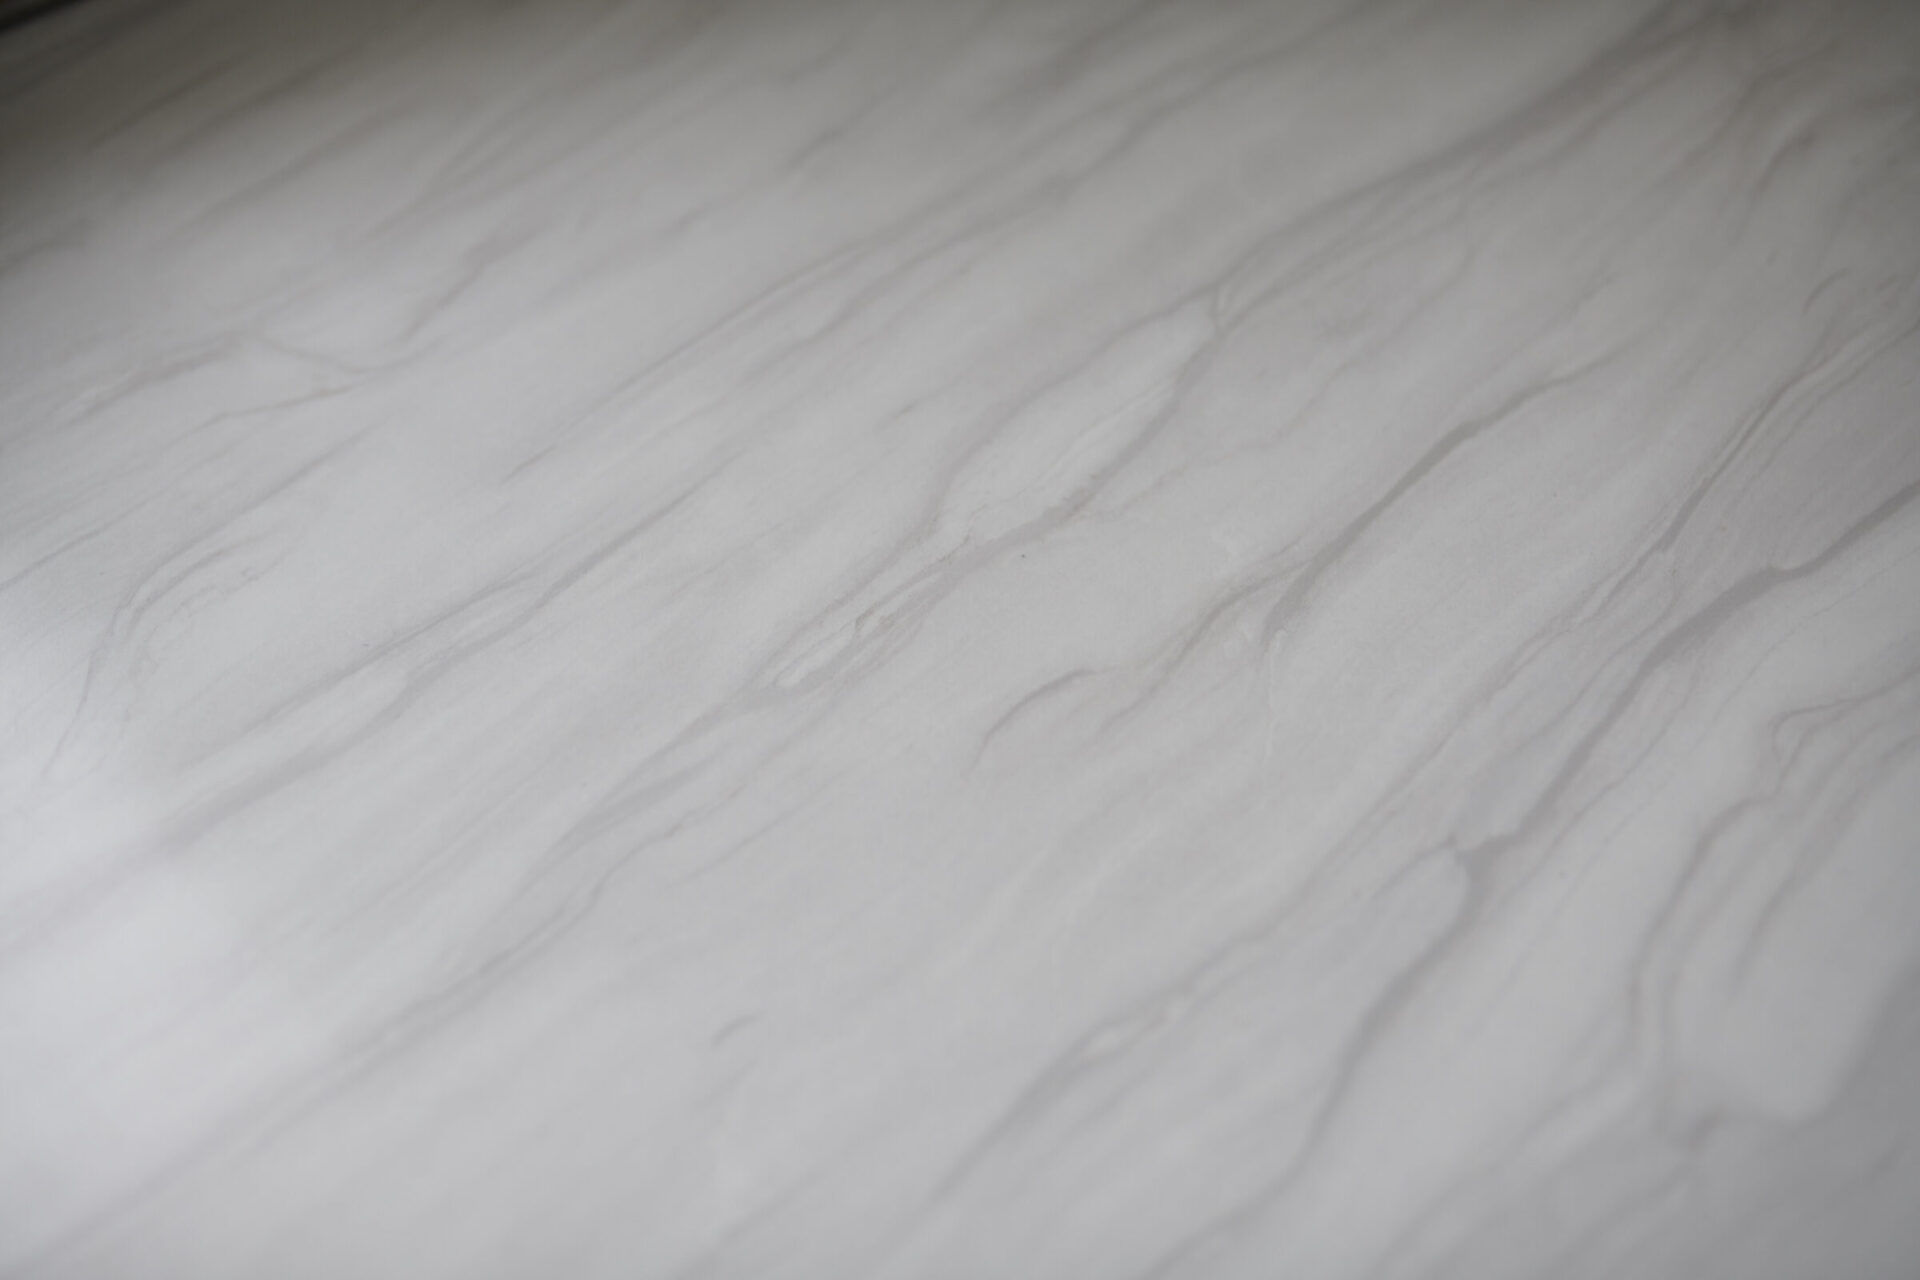 The image shows a close-up of a smooth surface with a marble pattern, predominantly in shades of white and gray, with subtle veining throughout.